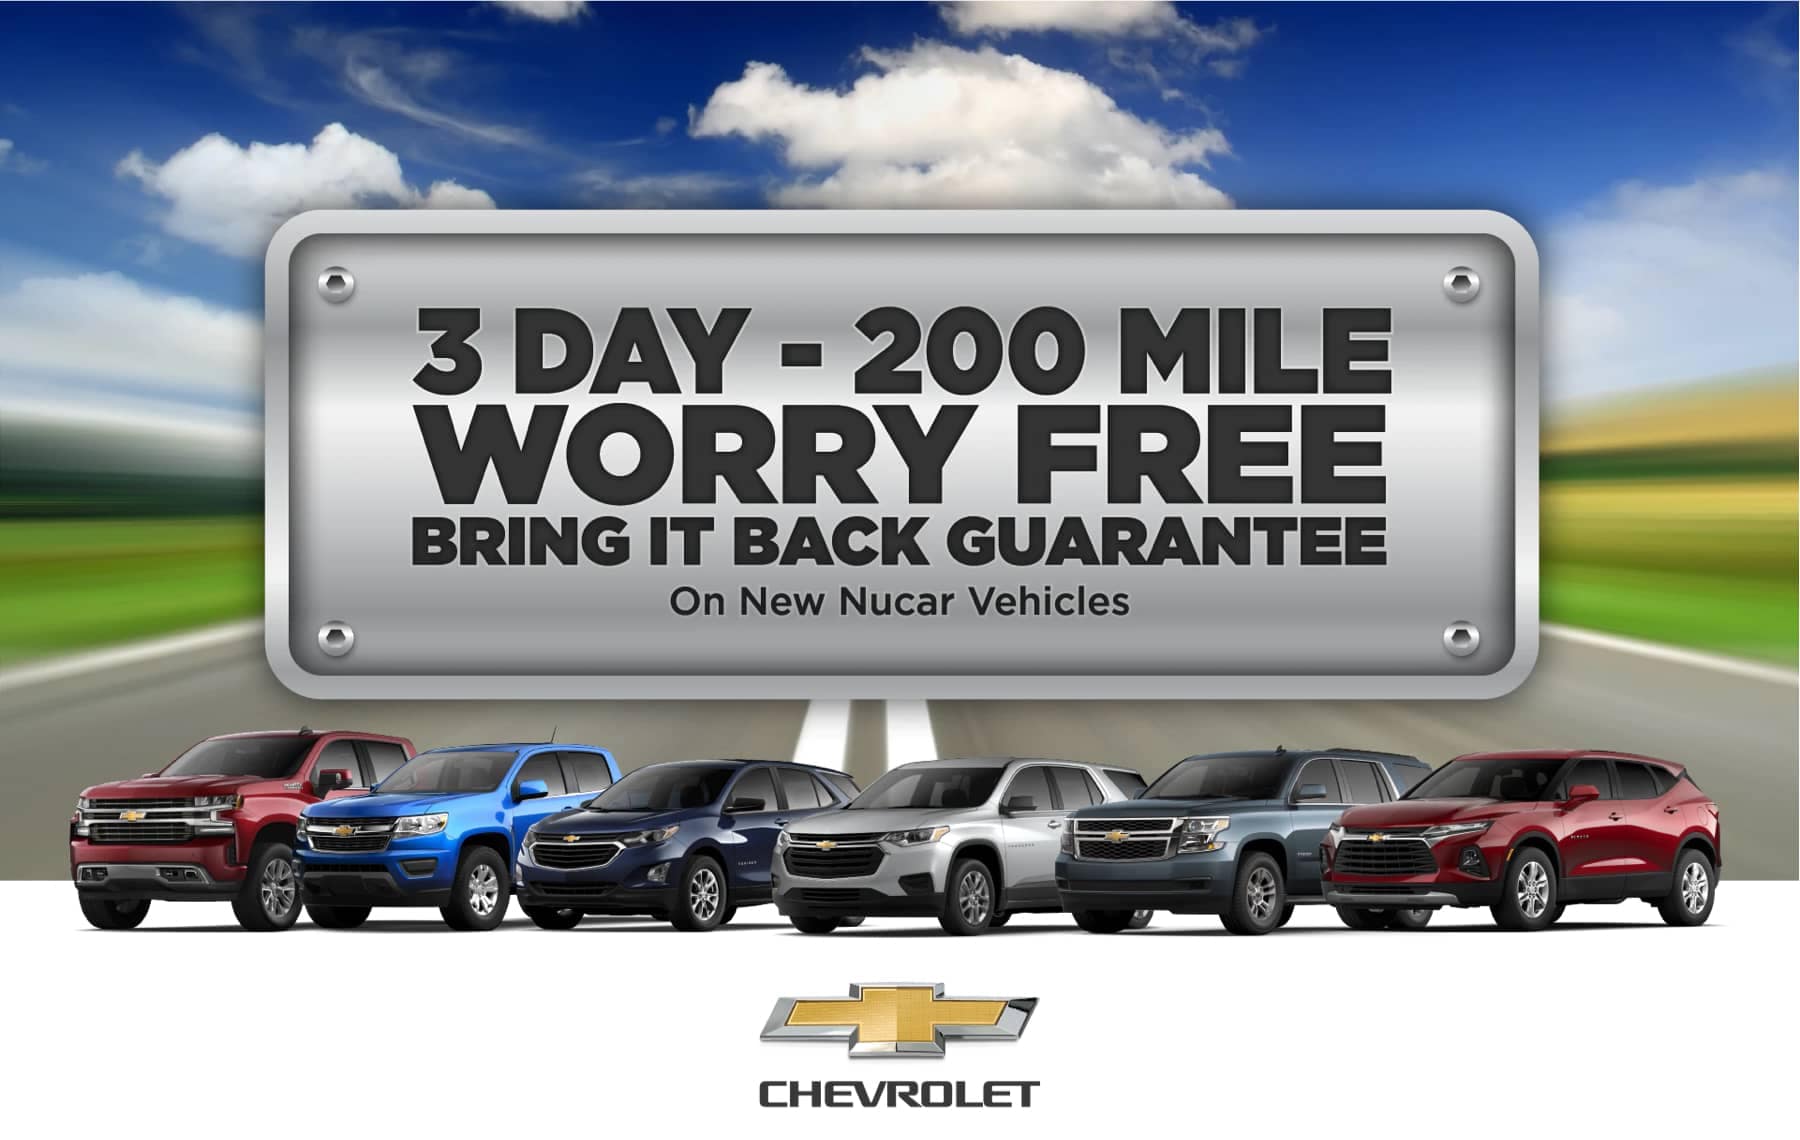 3 Day-200 Mile Worry Free Bring It Back Guarantee